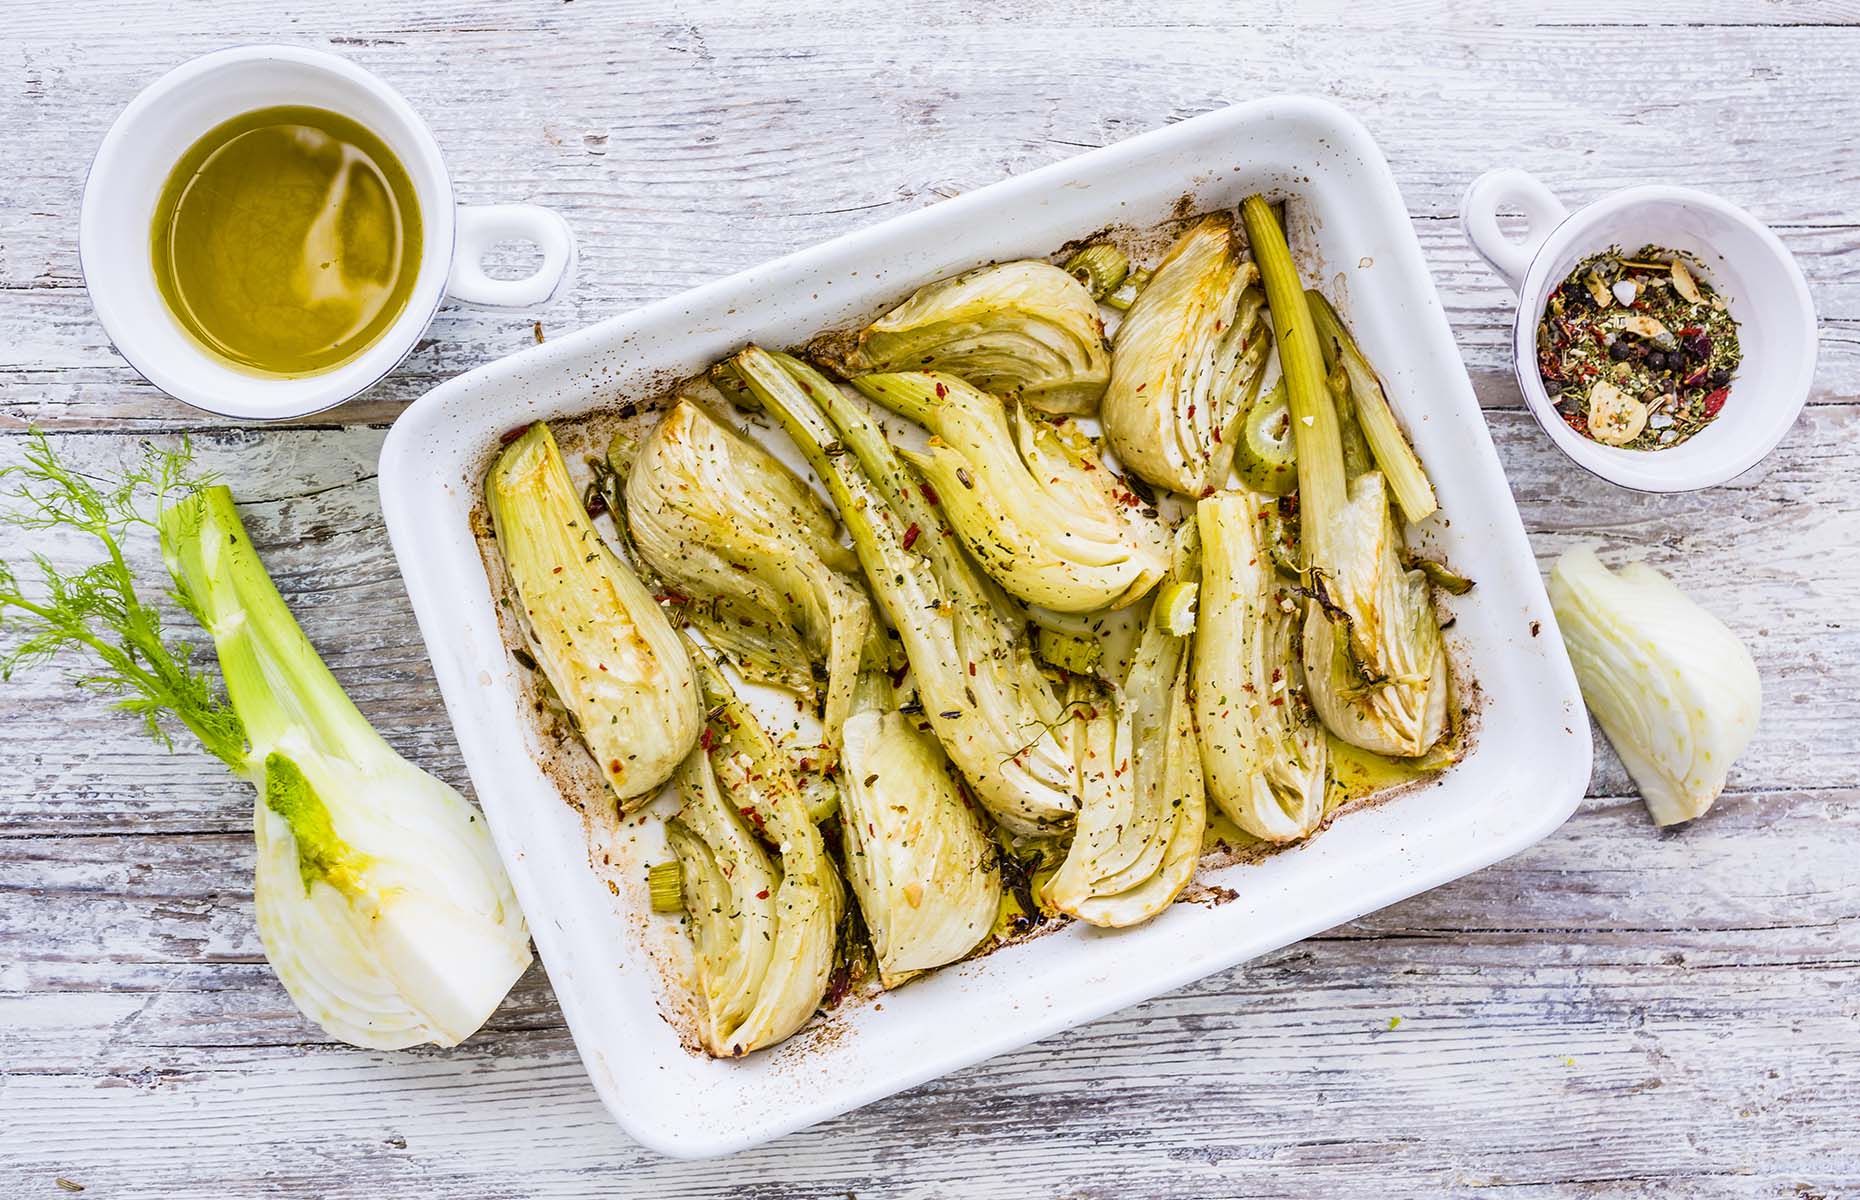 Roasted fennel